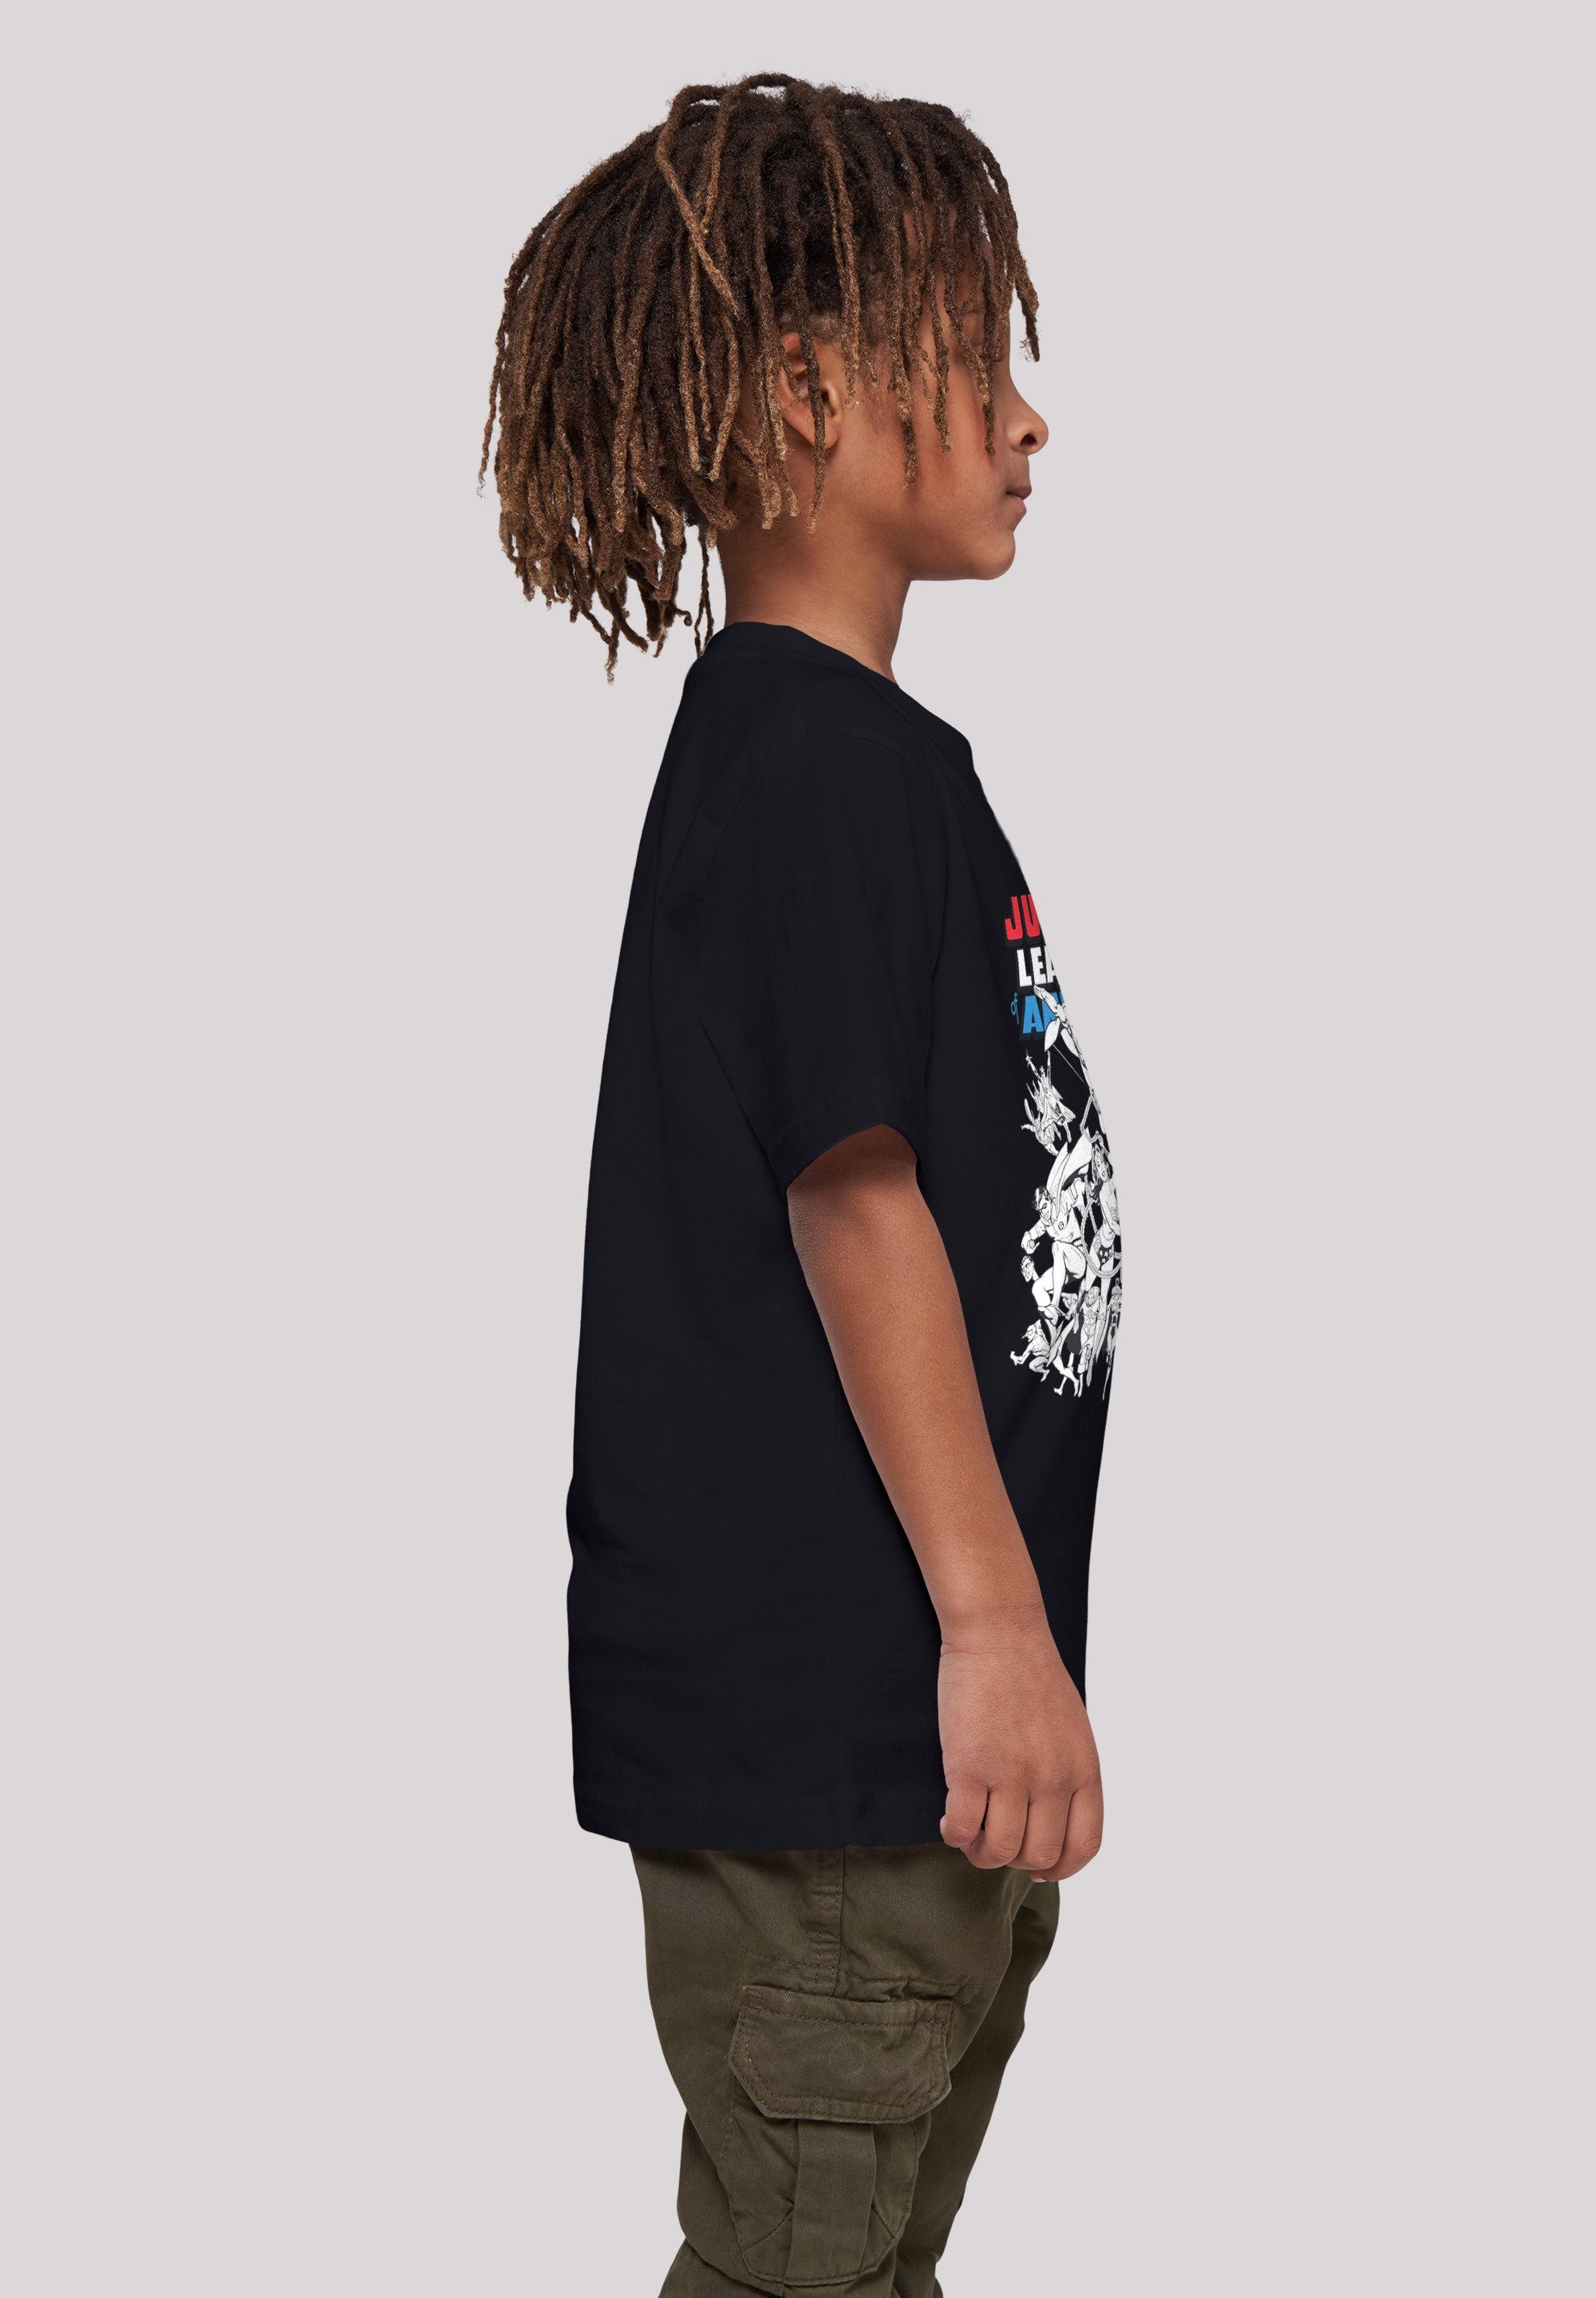 Kurzarmshirt Mono Kids Justice with F4NT4STIC Kinder (1-tlg) League Basic Tee Pose Action